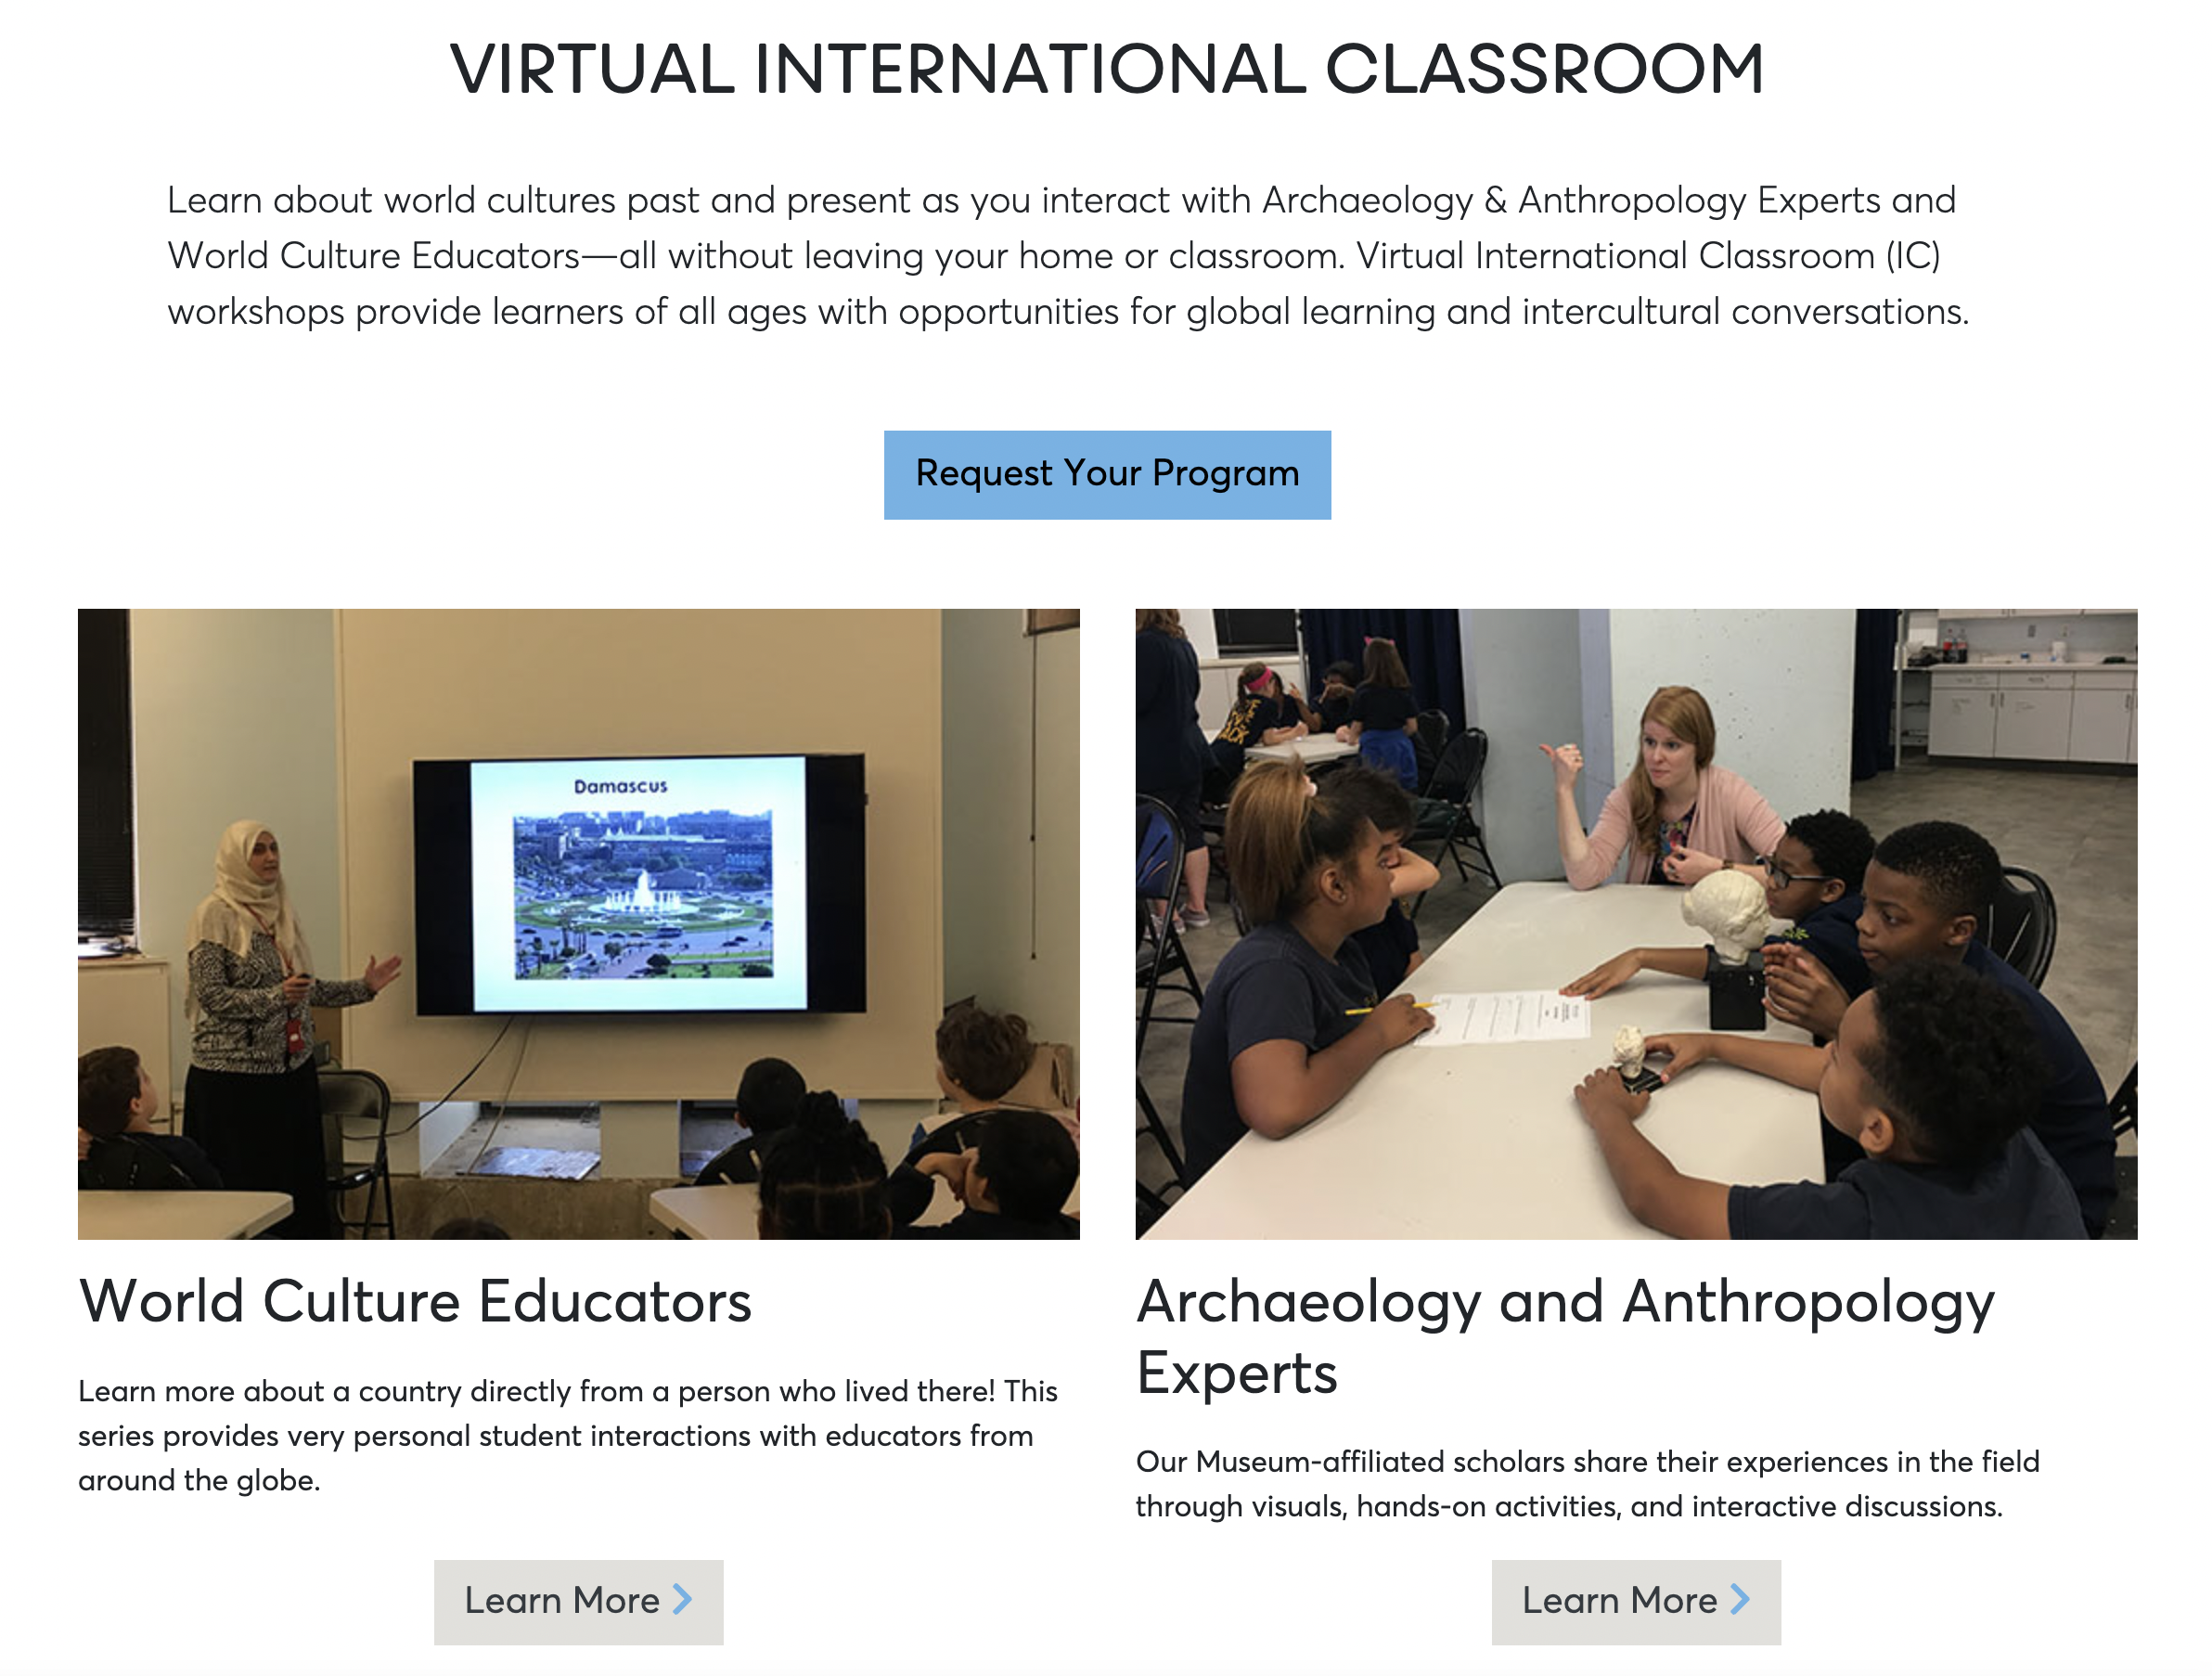 Learn about world cultures past and present as you interact with Archaeology & Anthropology Experts and World Culture Educators—all without leaving your home or classroom! Virtual International Classroom (IC) workshops provide learners of all ages with opportunities for global learning and intercultural conversations. World culture educators: Learn more about a country directly from someone who lived there! This series provides very personal student interactions with... (listed in description)